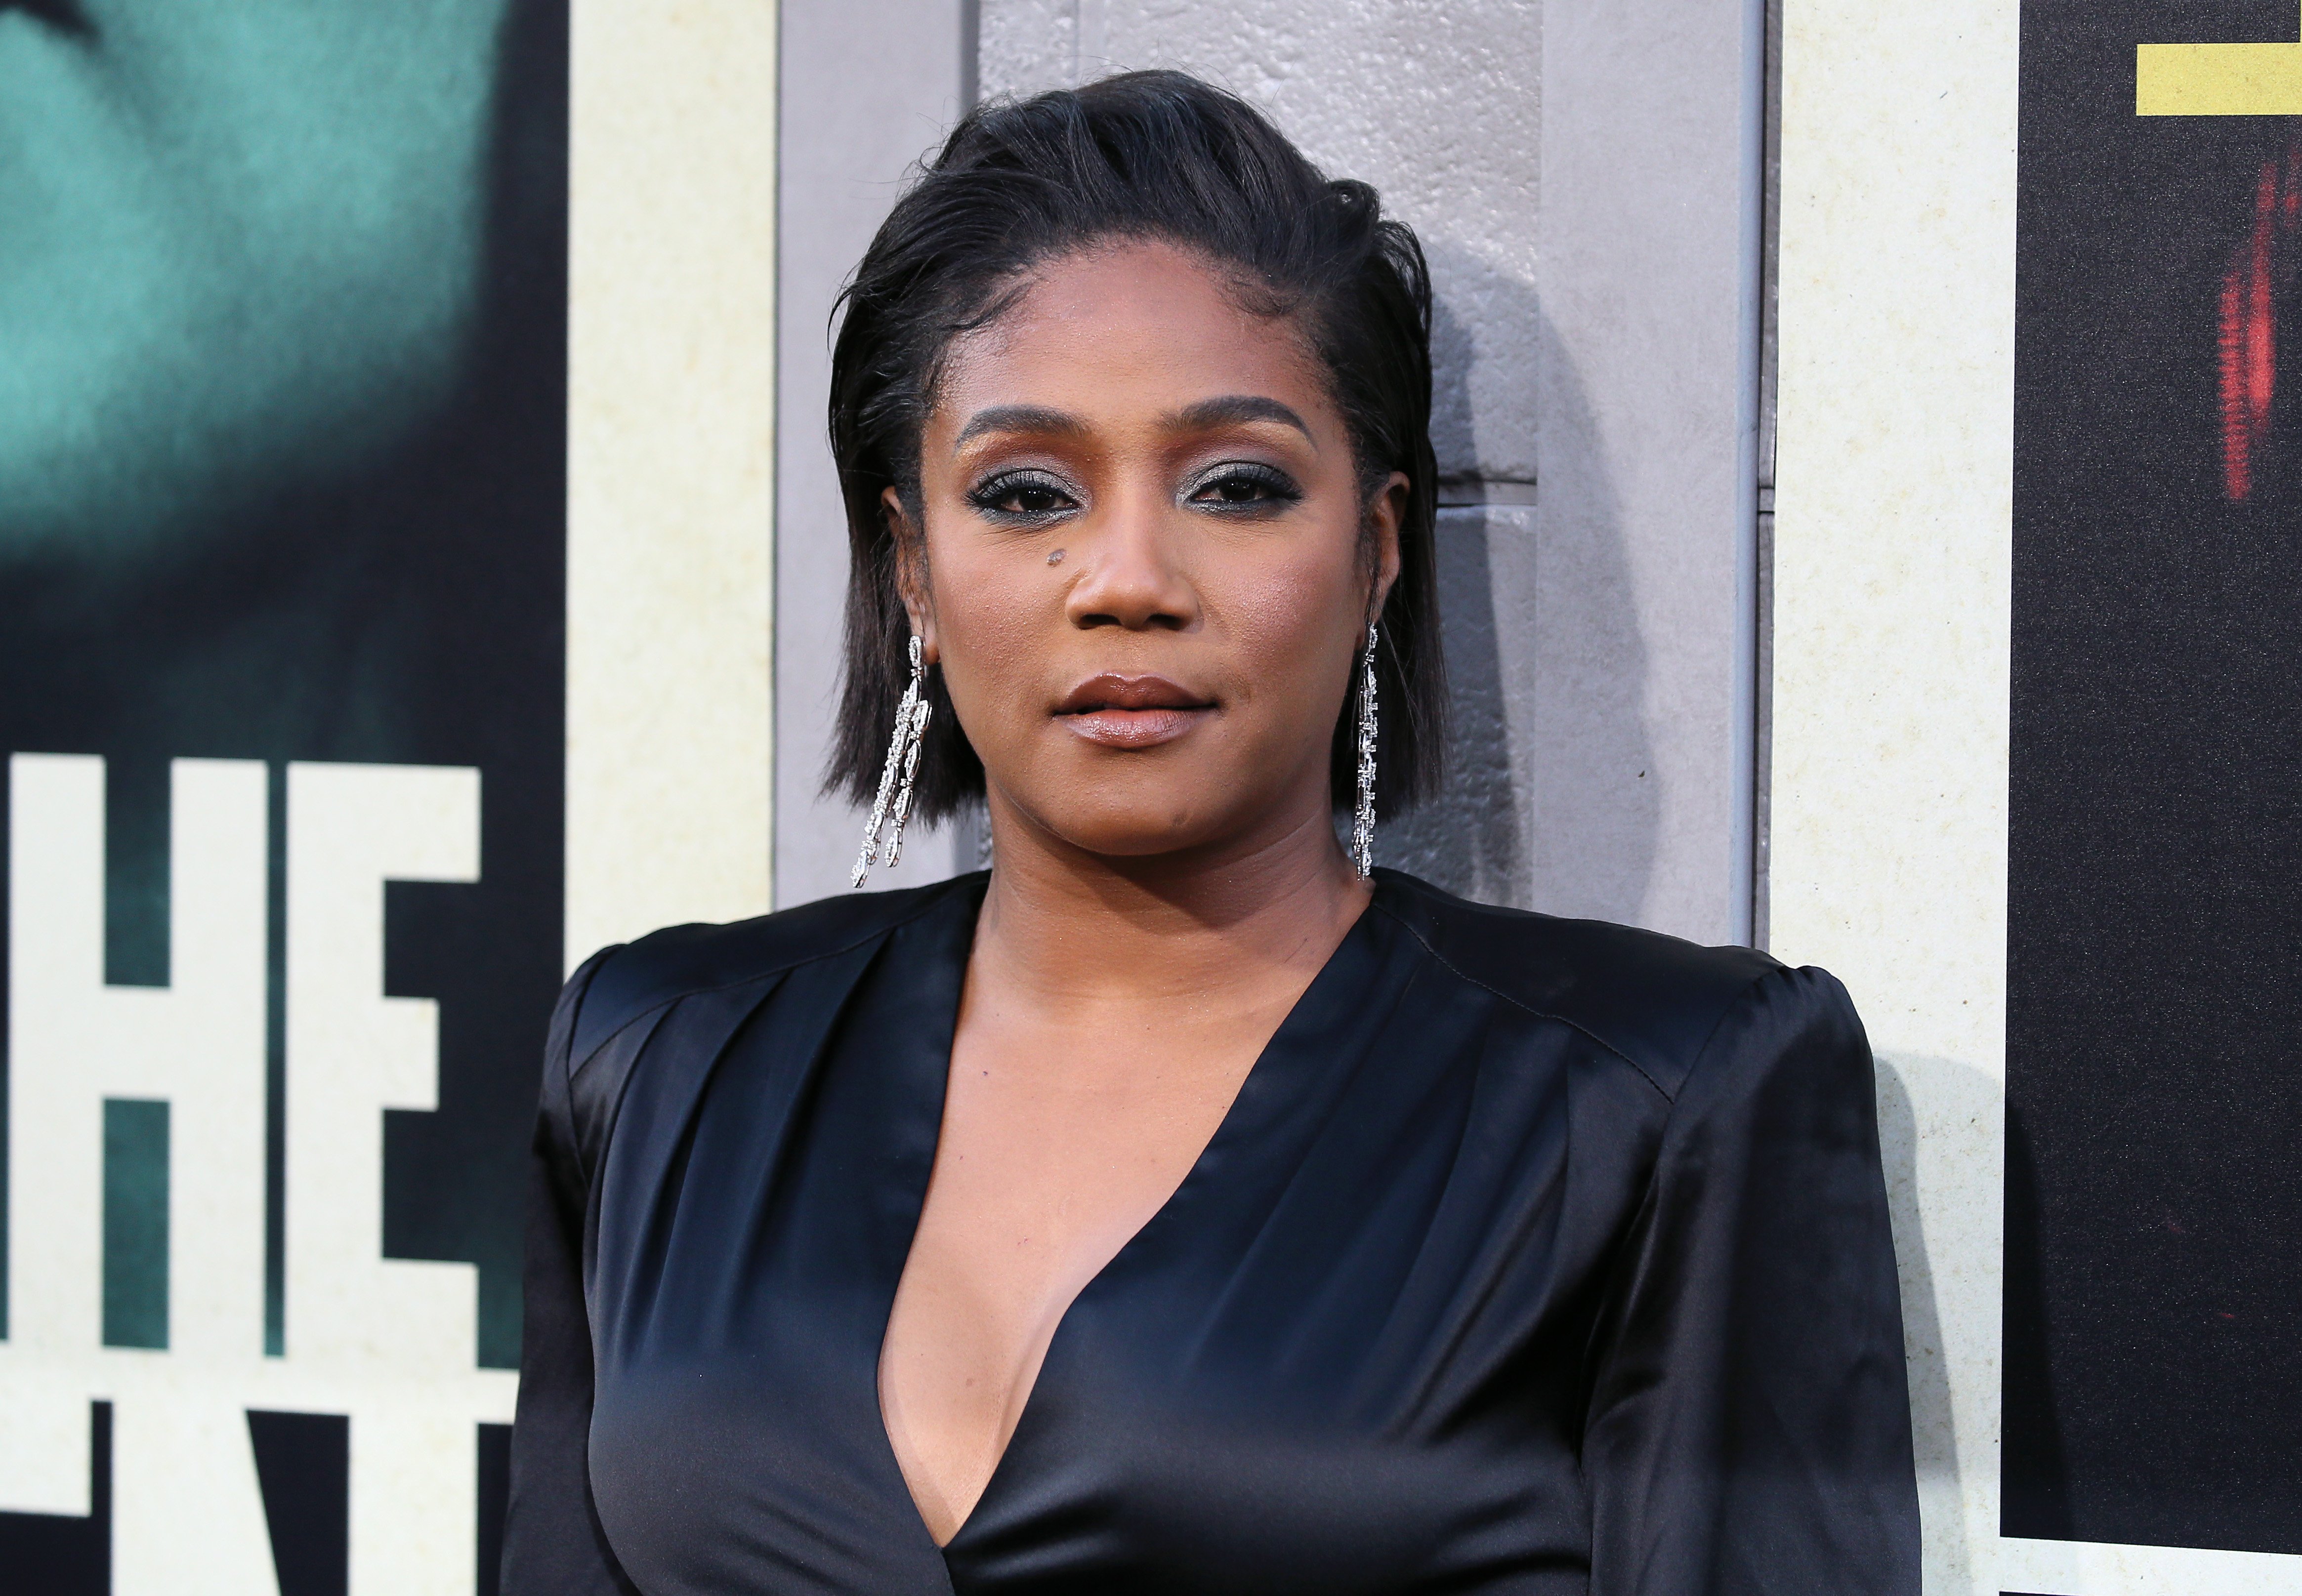 Tiffany Haddish at the premiere of "The Kitchen" at TCL Chinese Theatre on August 05, 2019 in Hollywood, California. | Source: Getty Images